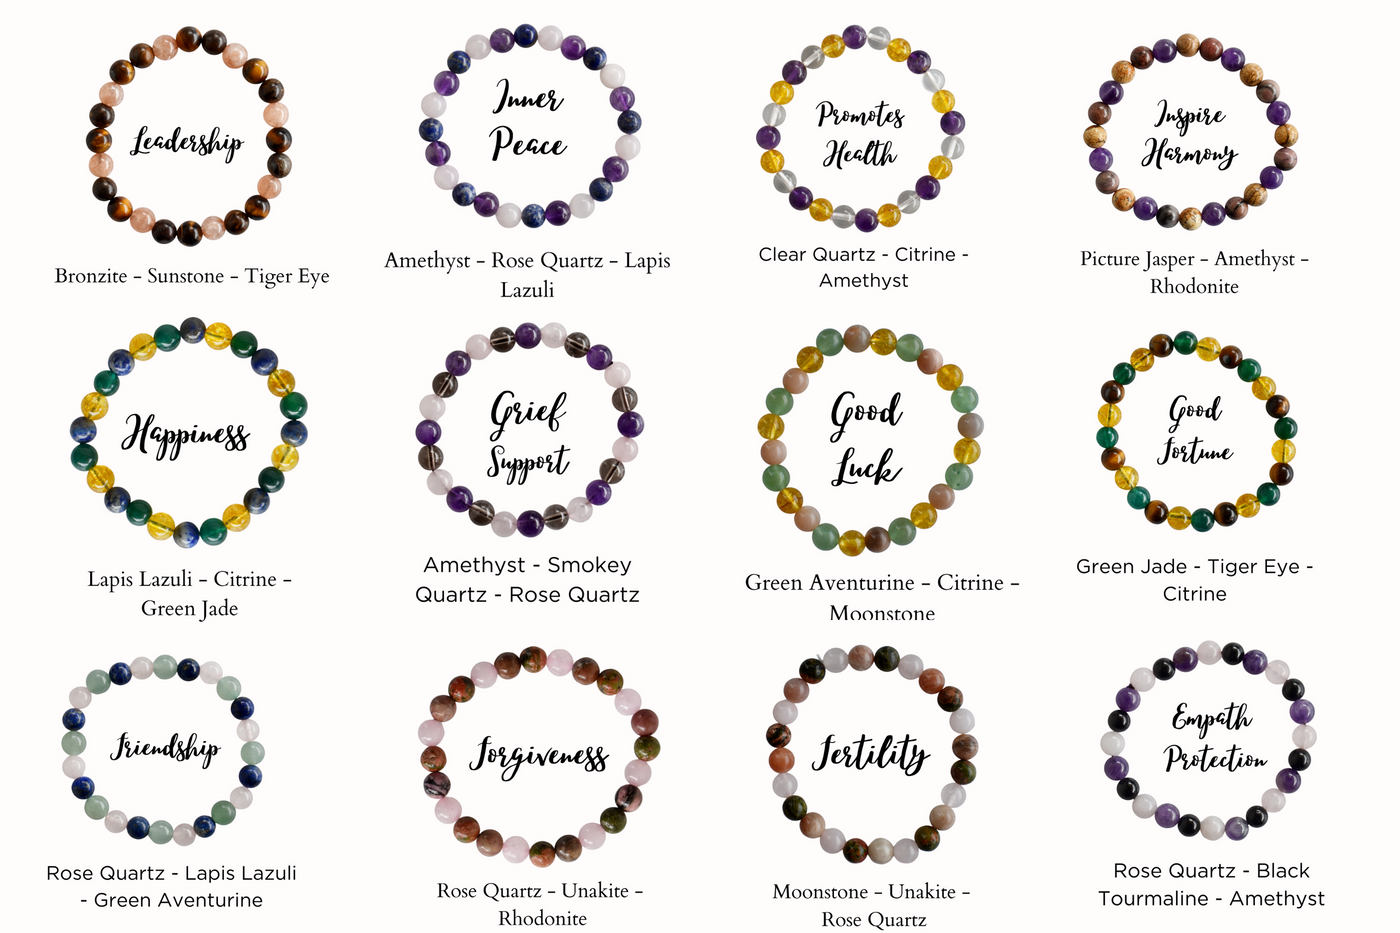 Encourages SELF-DISCOVERY Crystal Bracelet (Communication, Balance, Luck)